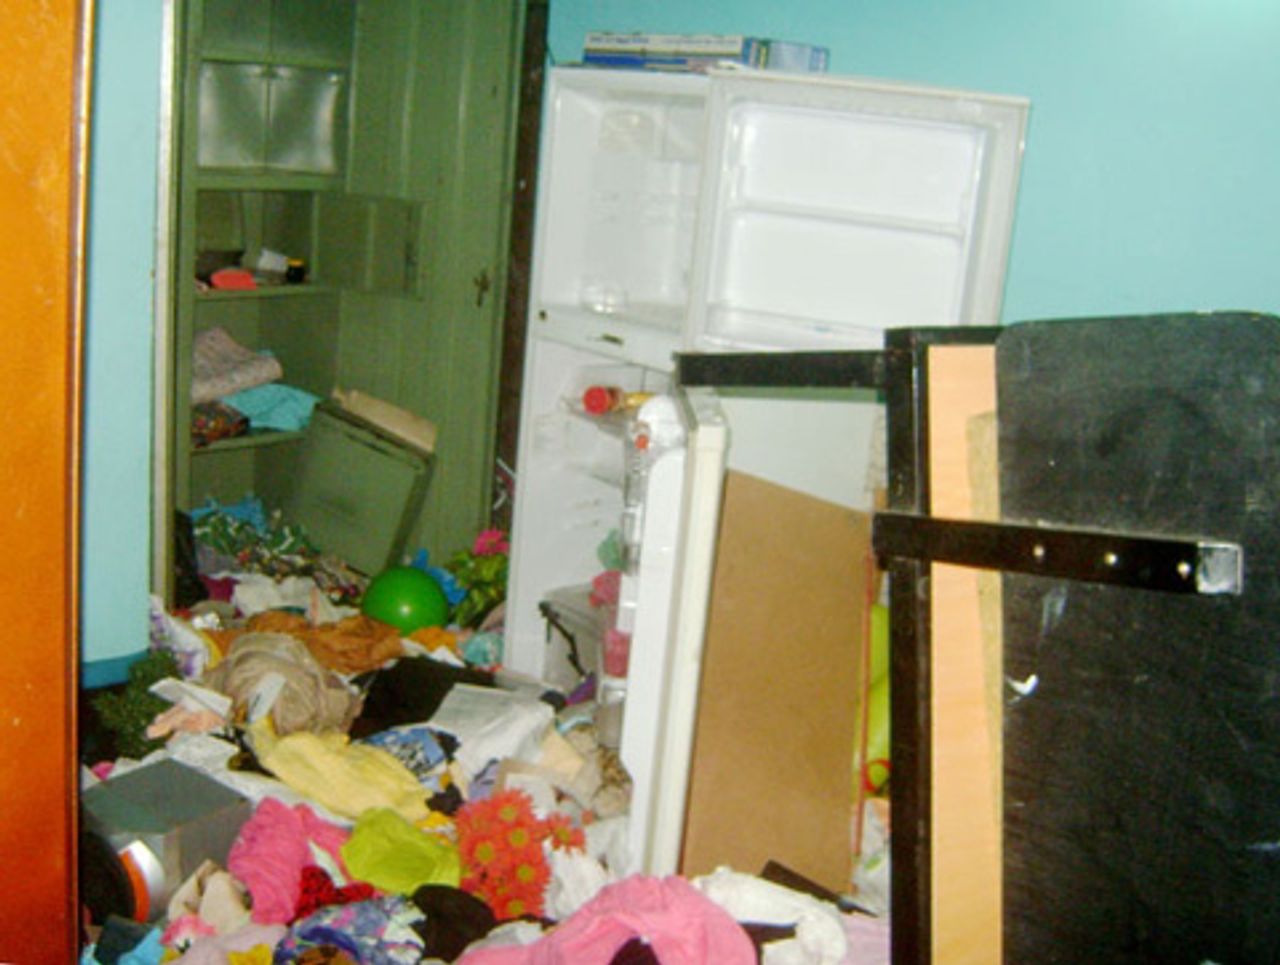 Home trashed in police raid